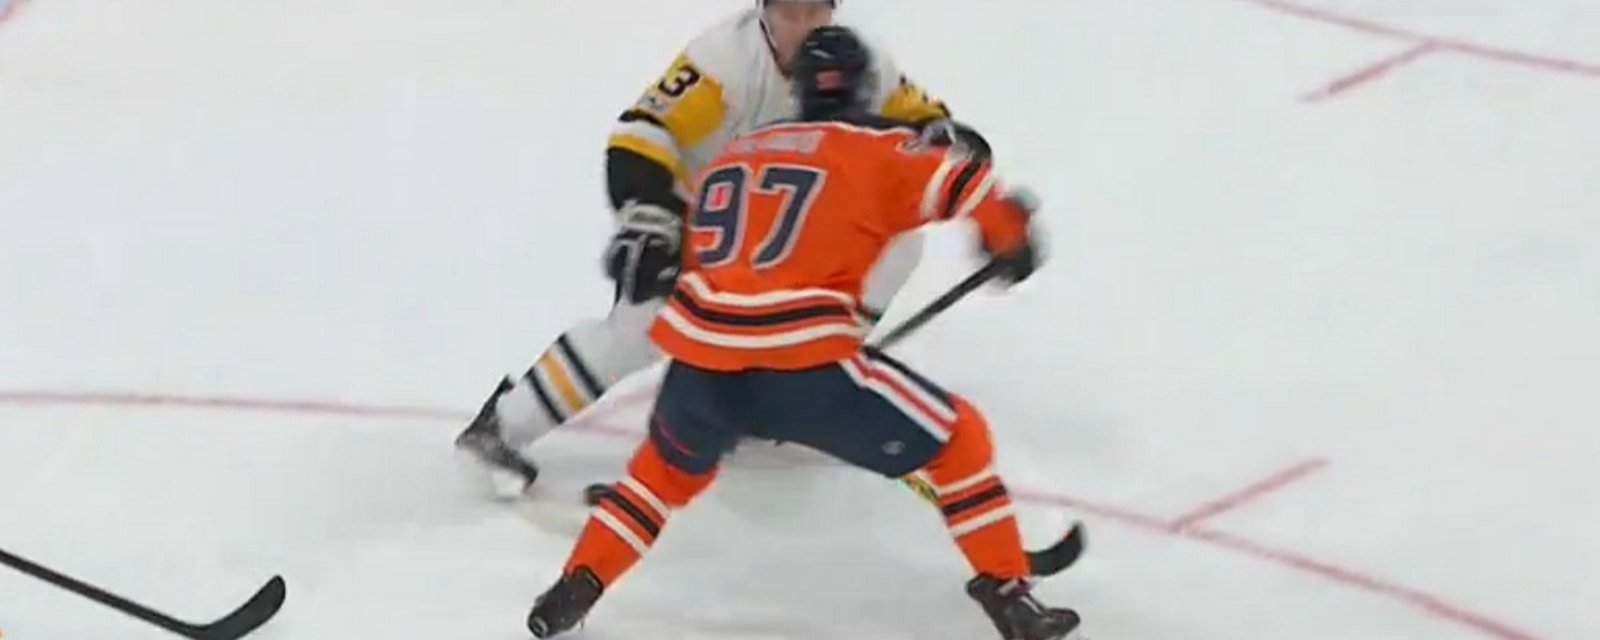 Connor McDavid dances around the Penguins to set up an incredible goal.